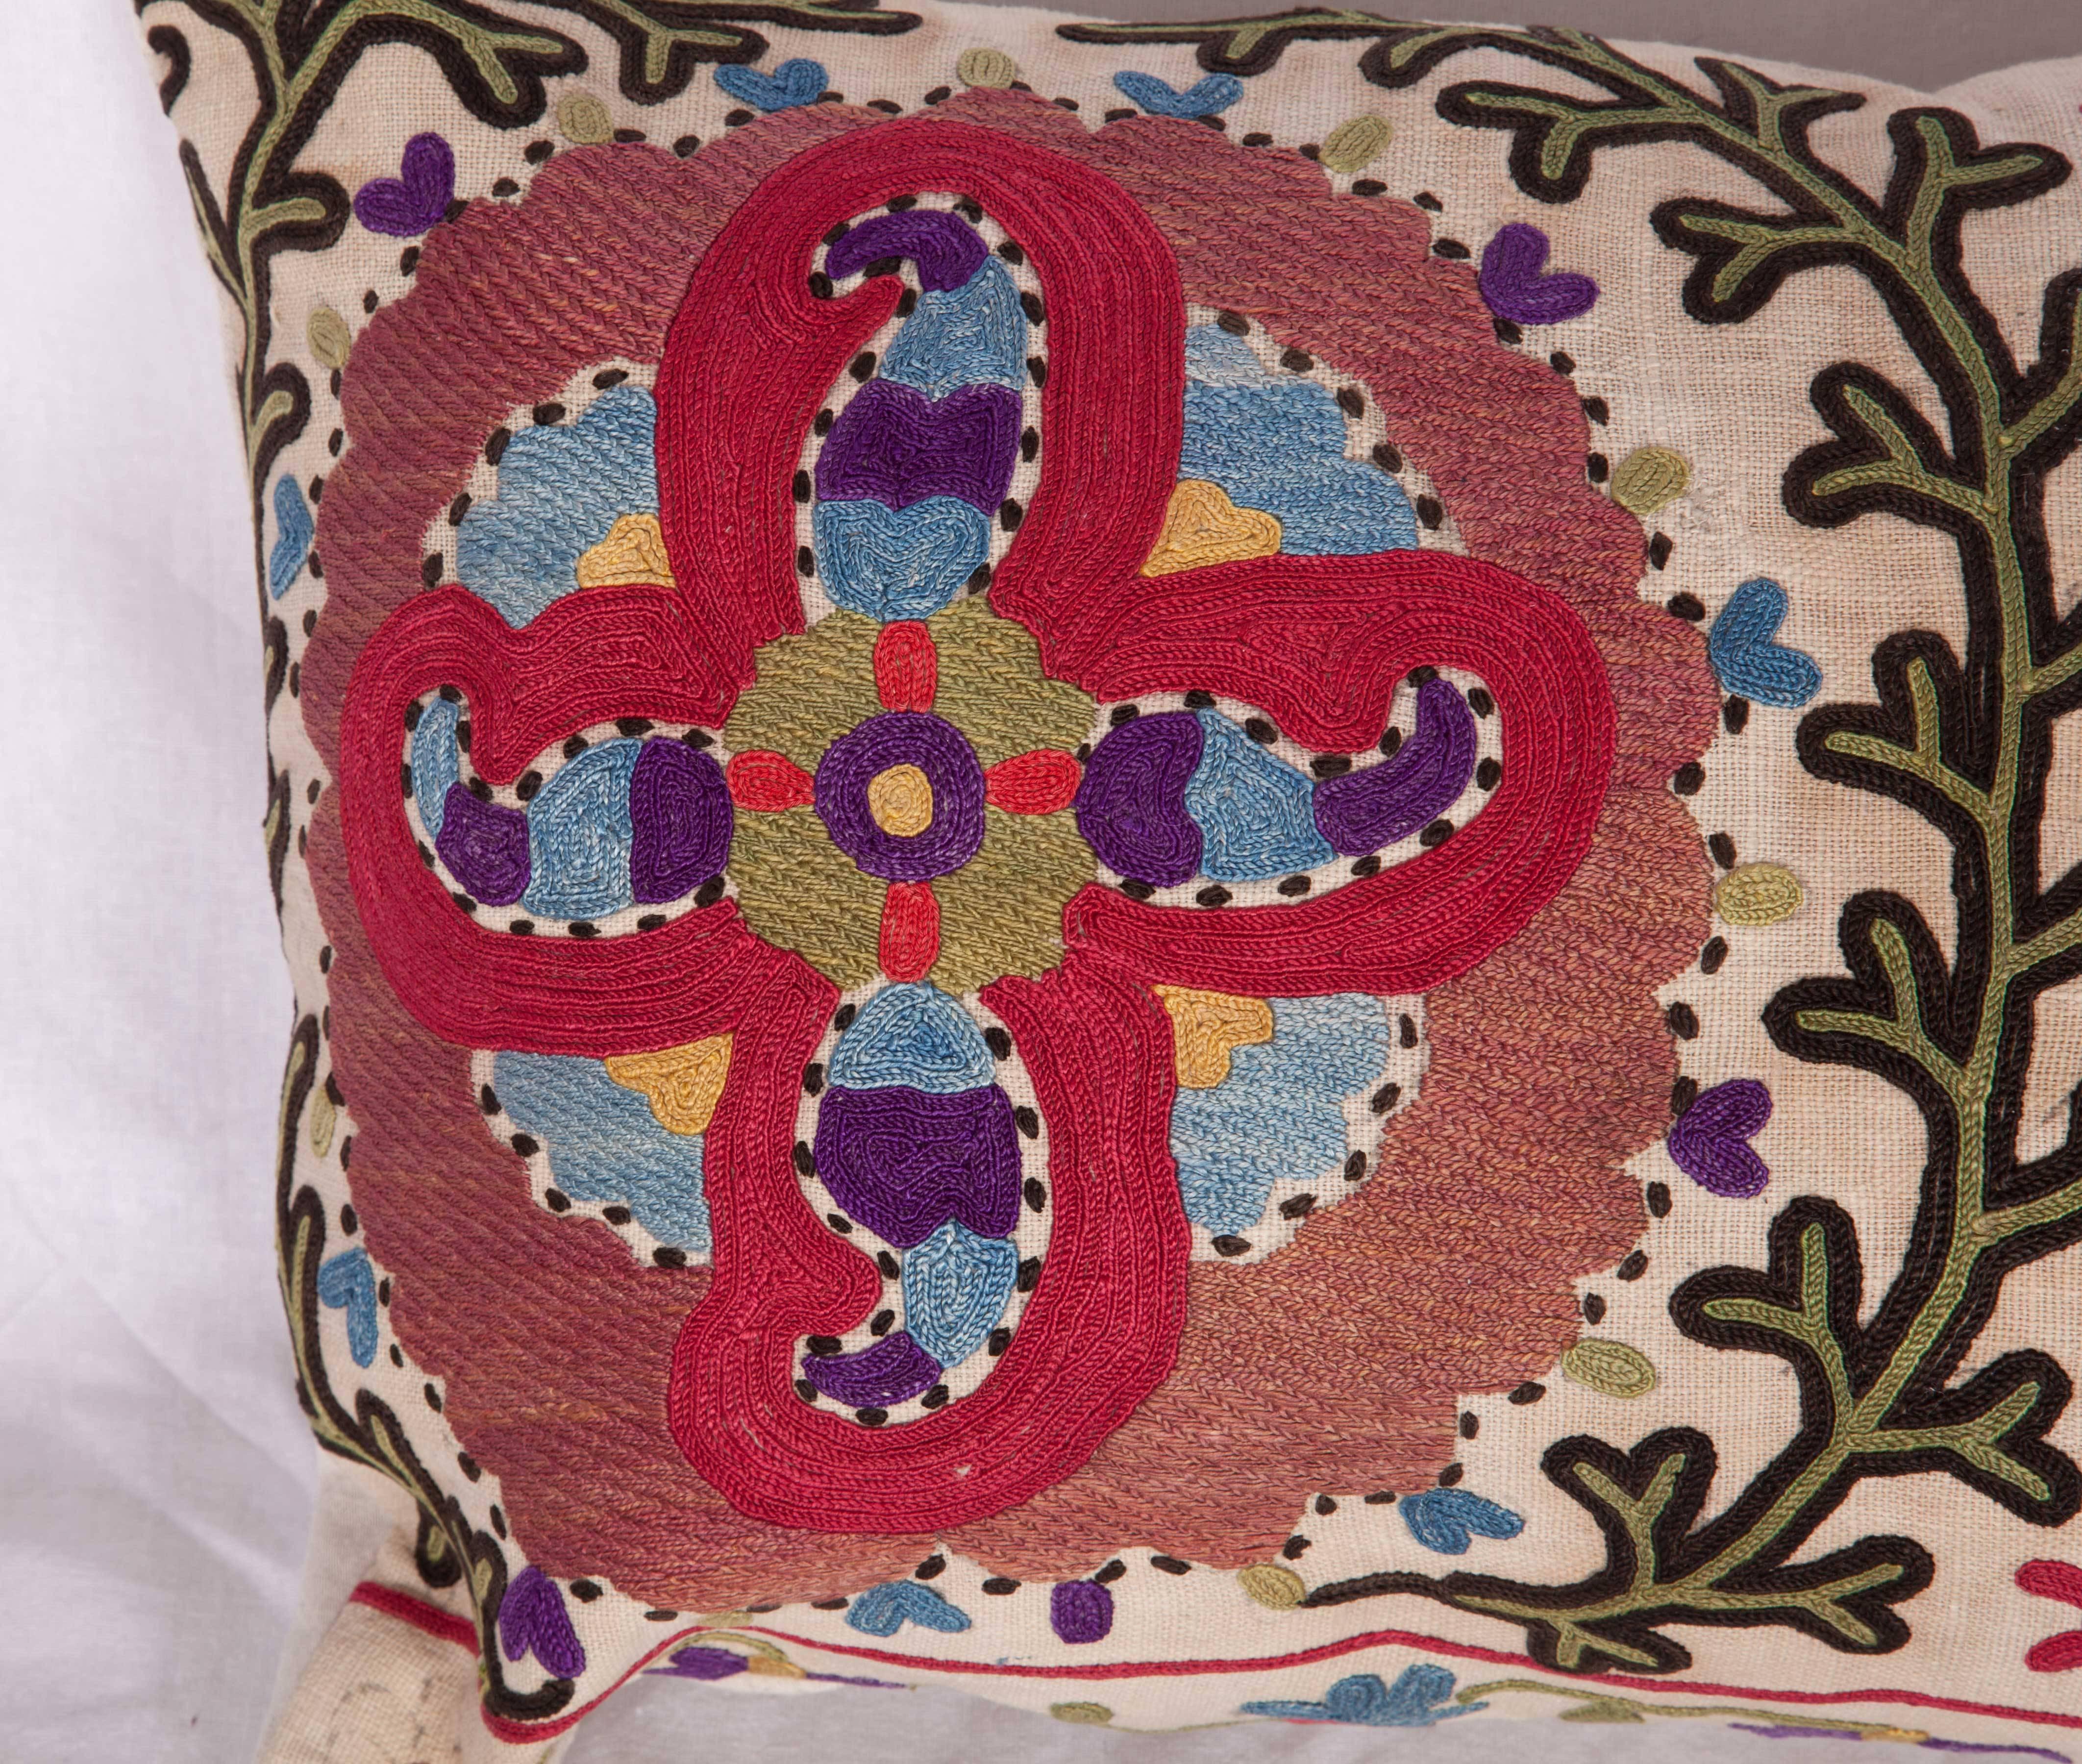 The pillow is made out of a late 19th century, Uzbek Bukhara Suzani. It does not come with an insert but it comes with a bag made to the size and out of cotton to accommodate the filling. The backing is made of linen. Please note 'filling is not